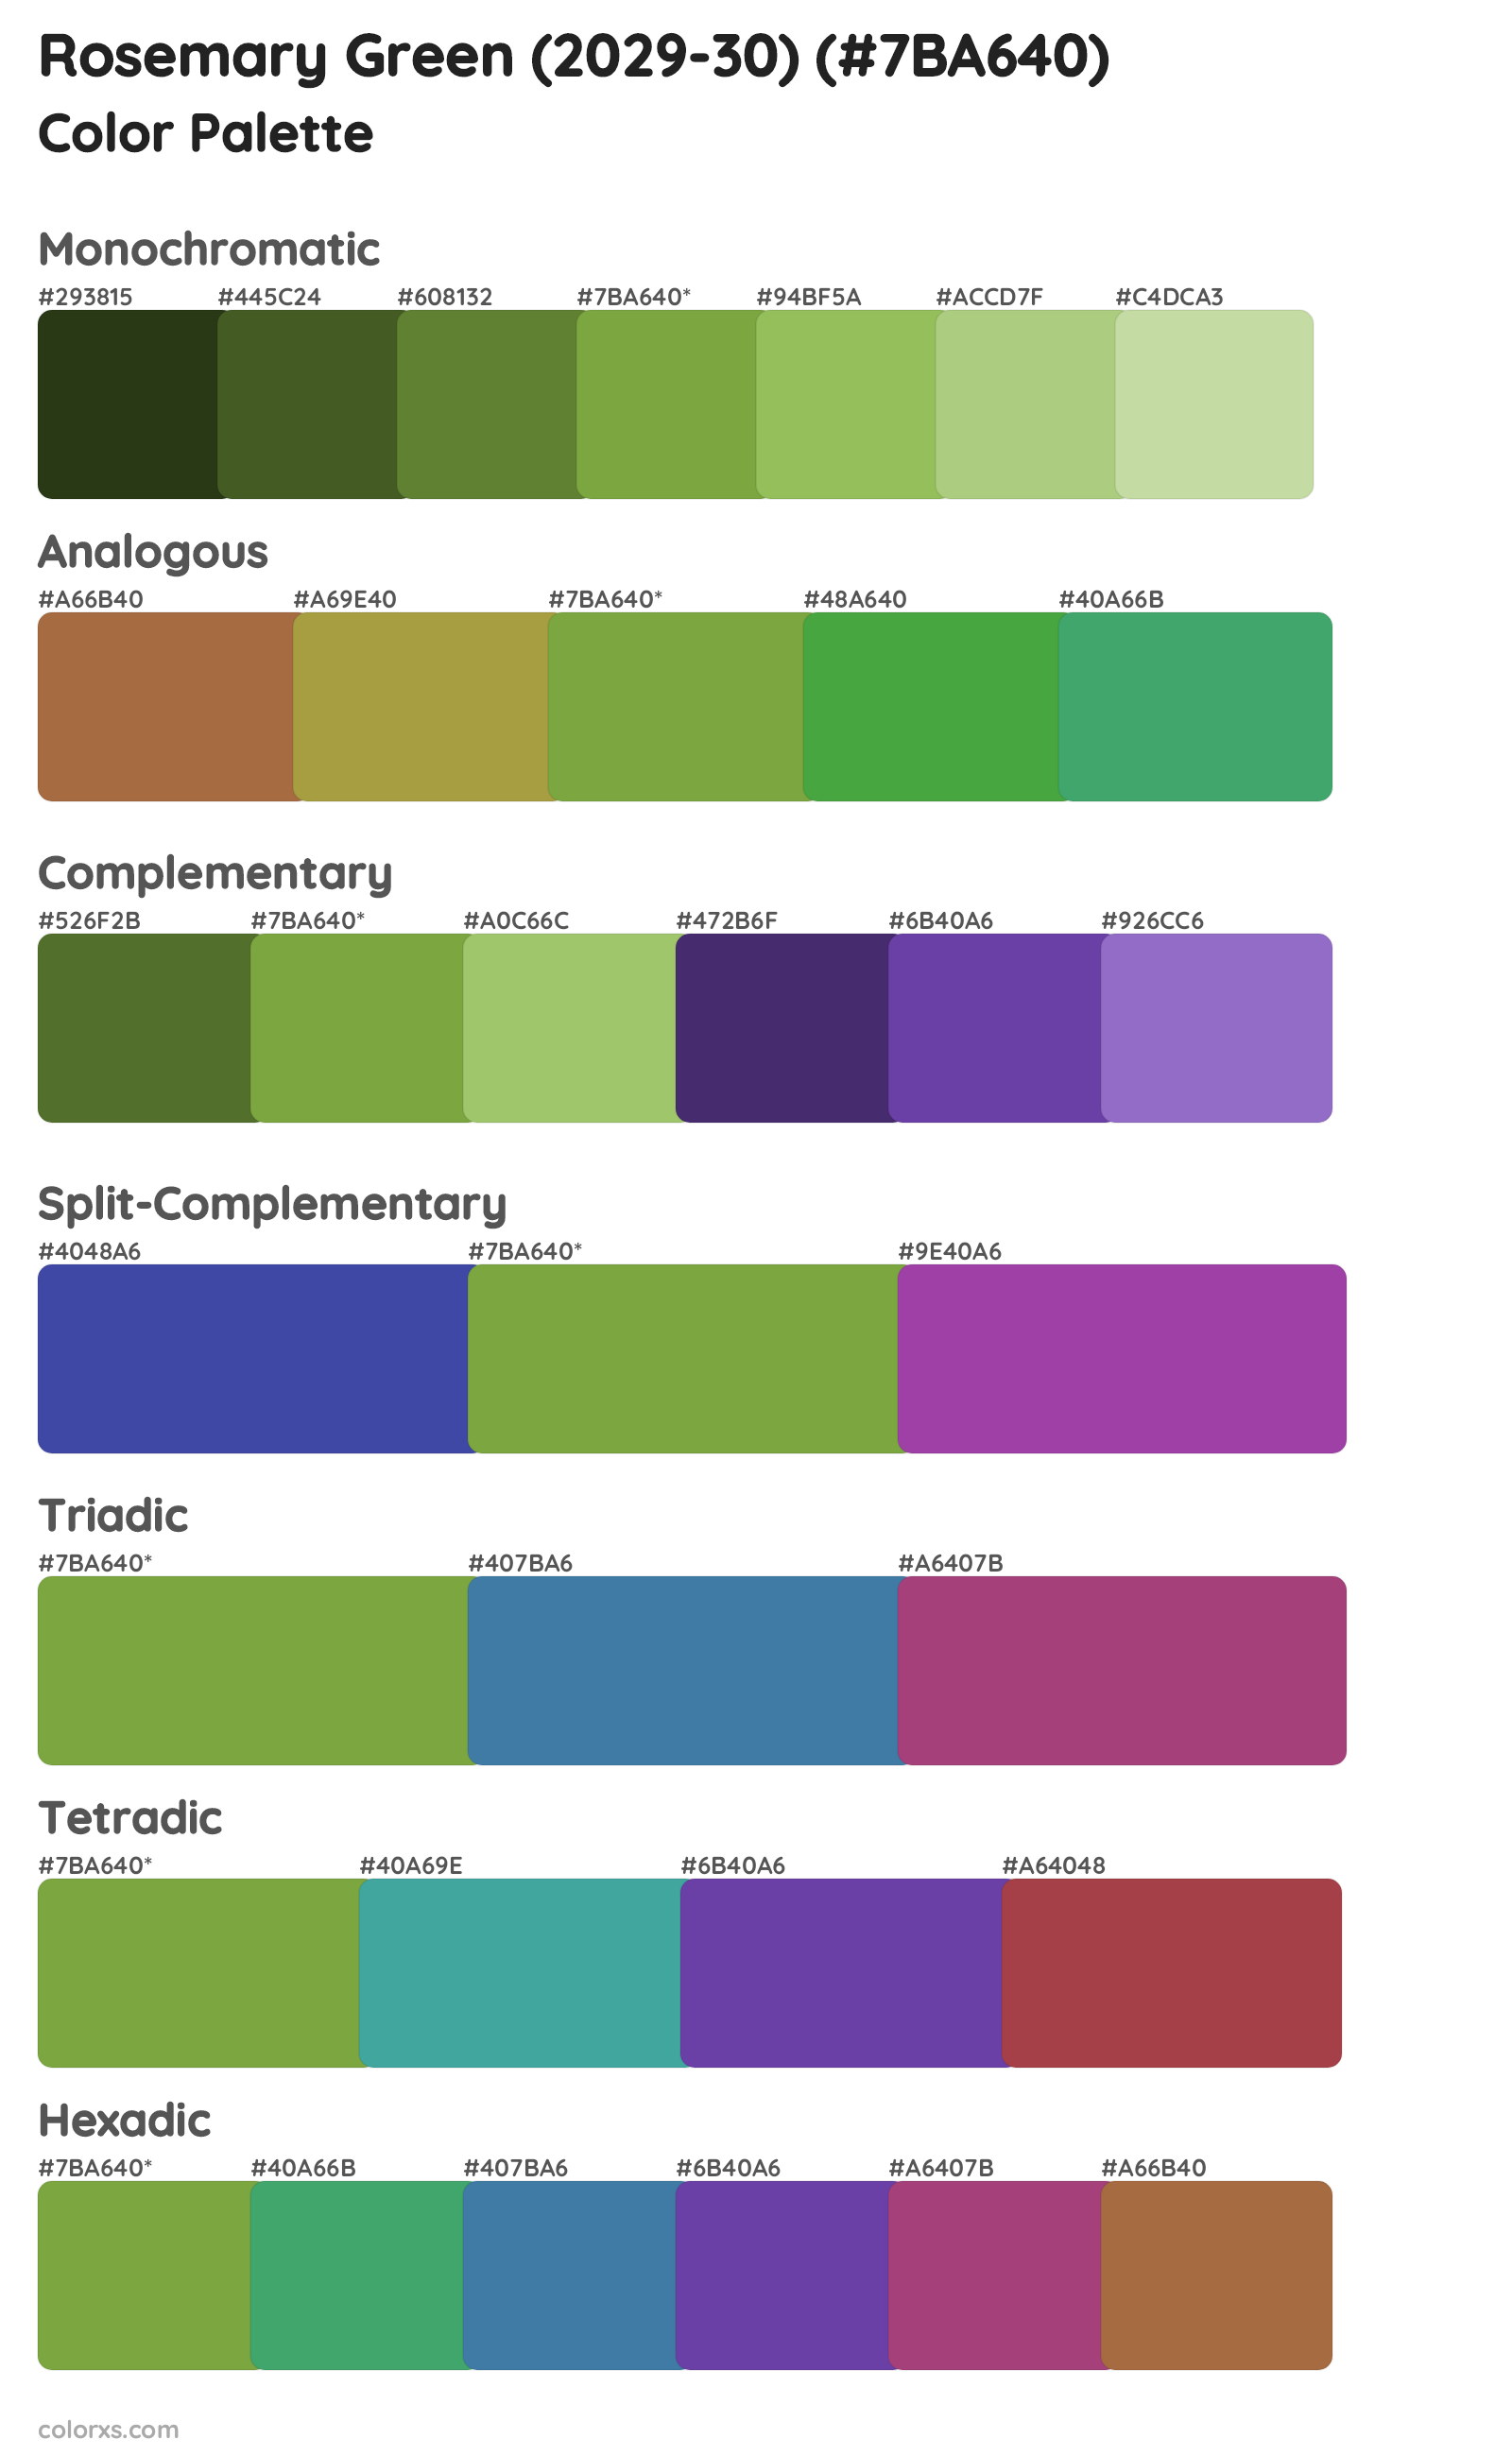 Rosemary Green (2029-30) Color Scheme Palettes